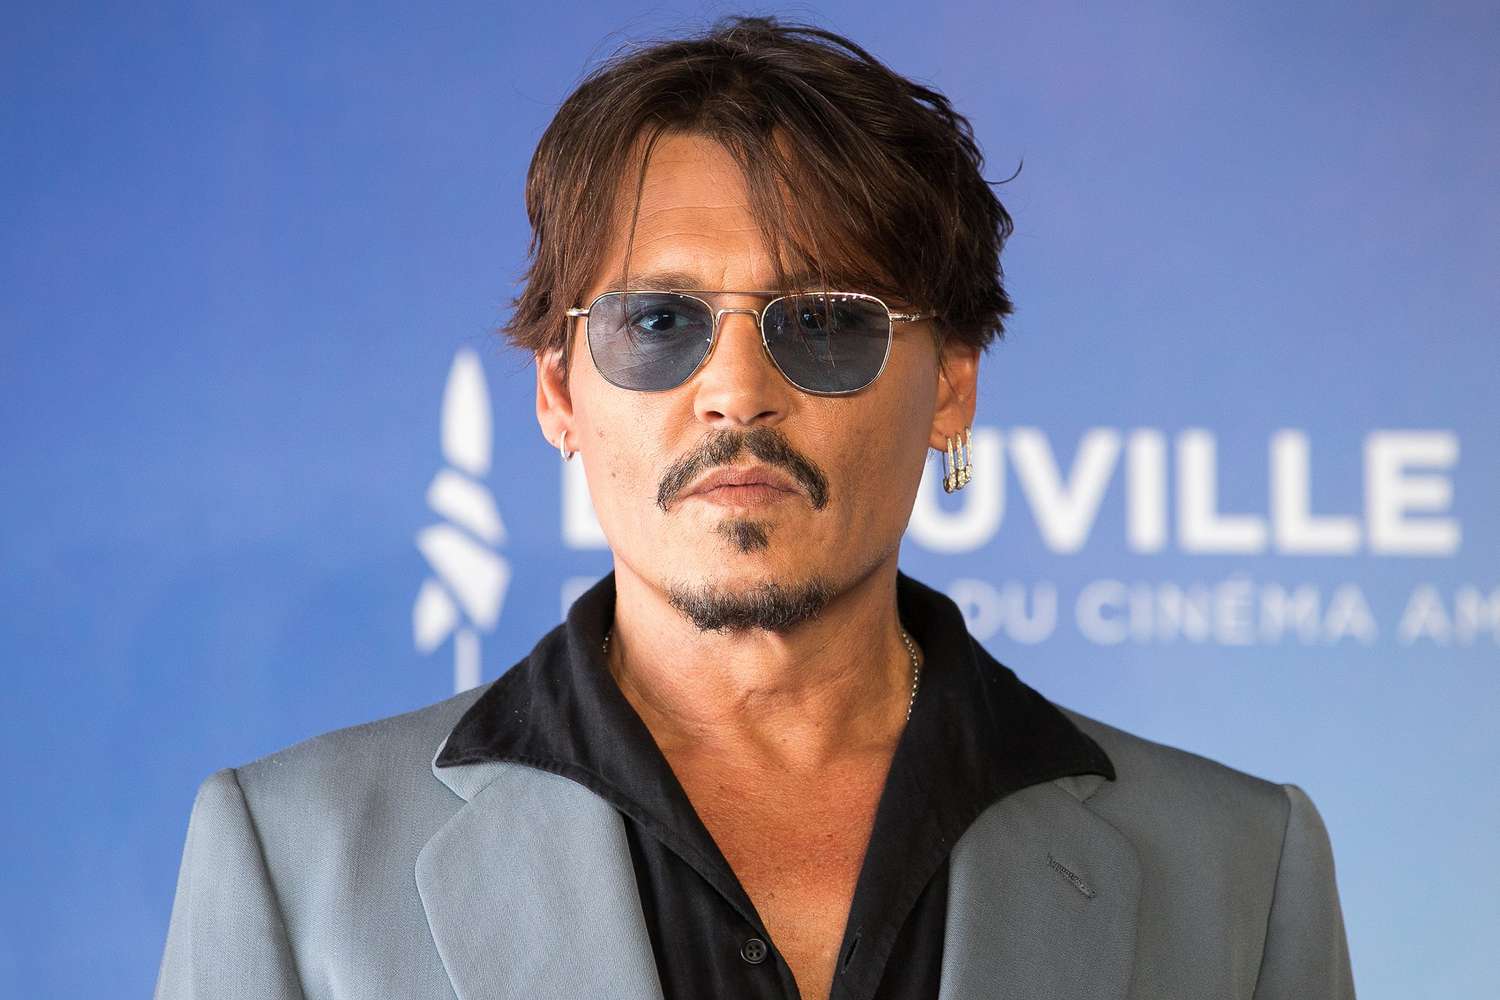 No one is safe': Johnny Depp addresses the dangers of "cancel culture"